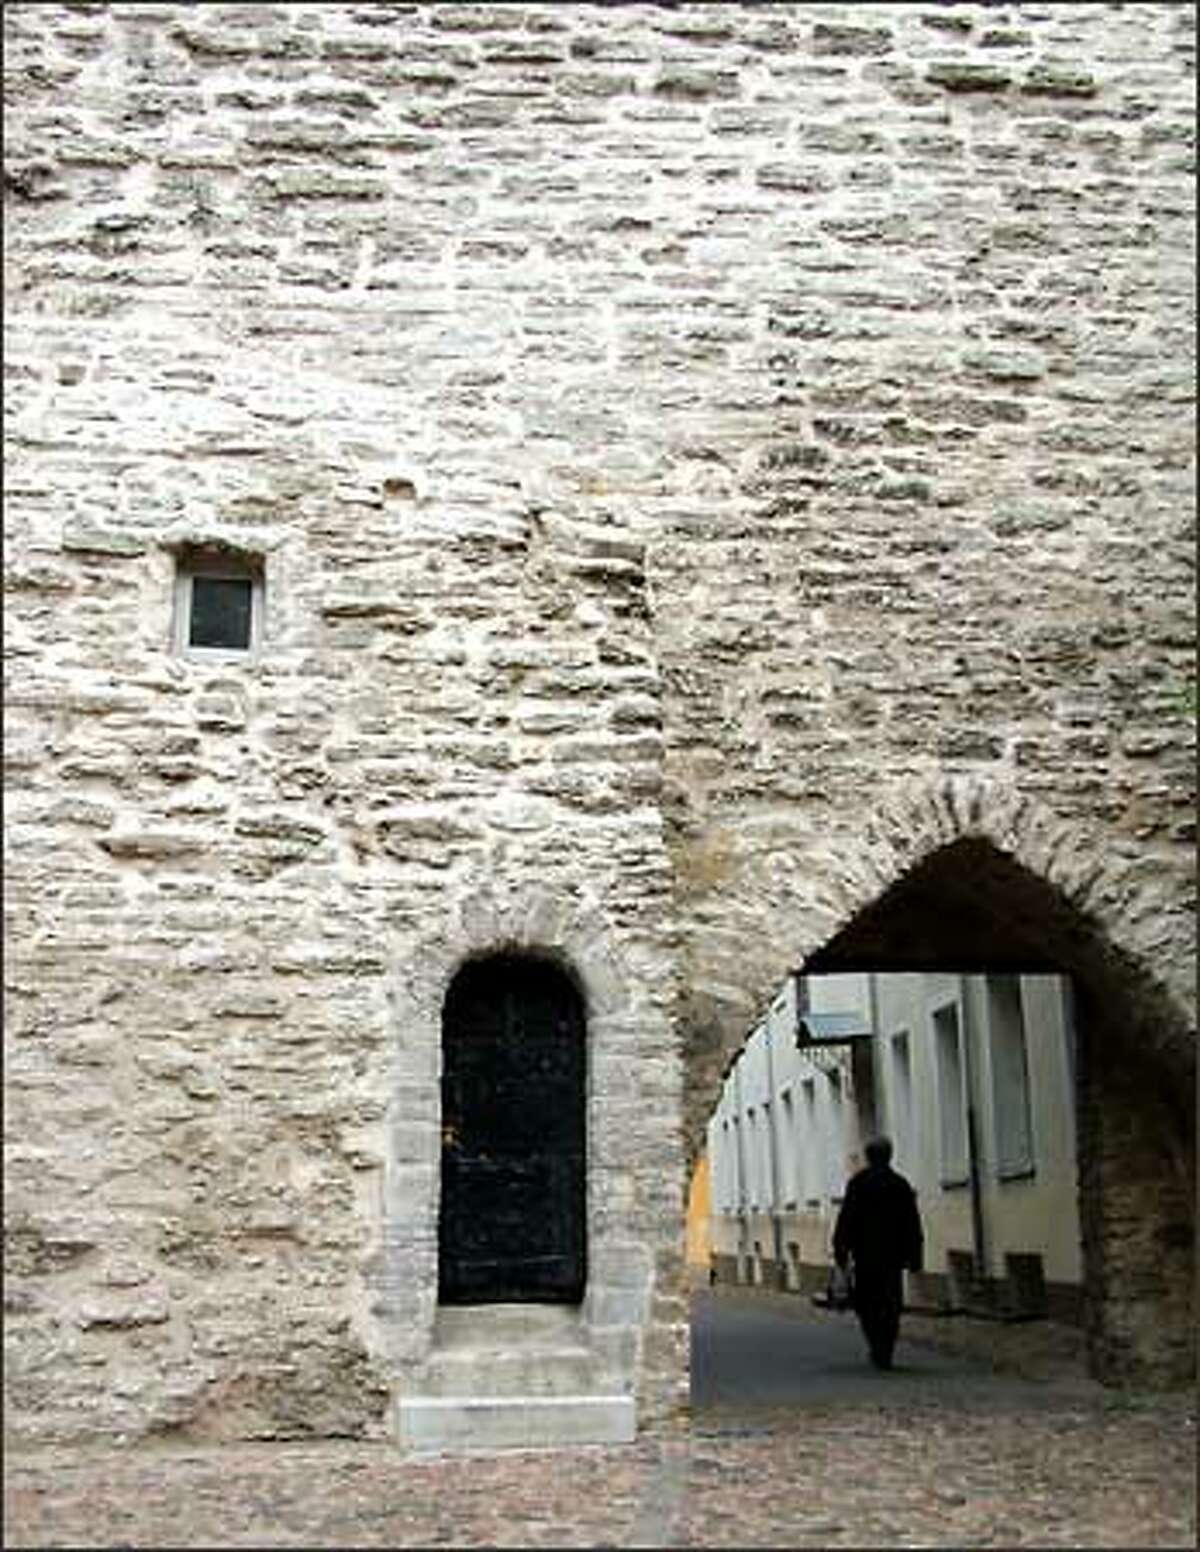 At the heart of Tallinn, Estonia, lies one of the best-preserved medieval towns in Europe. More than a mile and a half of the original stone wall still stands guard around a city full of meandering cobblestone streets. Cobblestone, by the way, looks really quaint and all but isn't particularly comfortable to walk on.